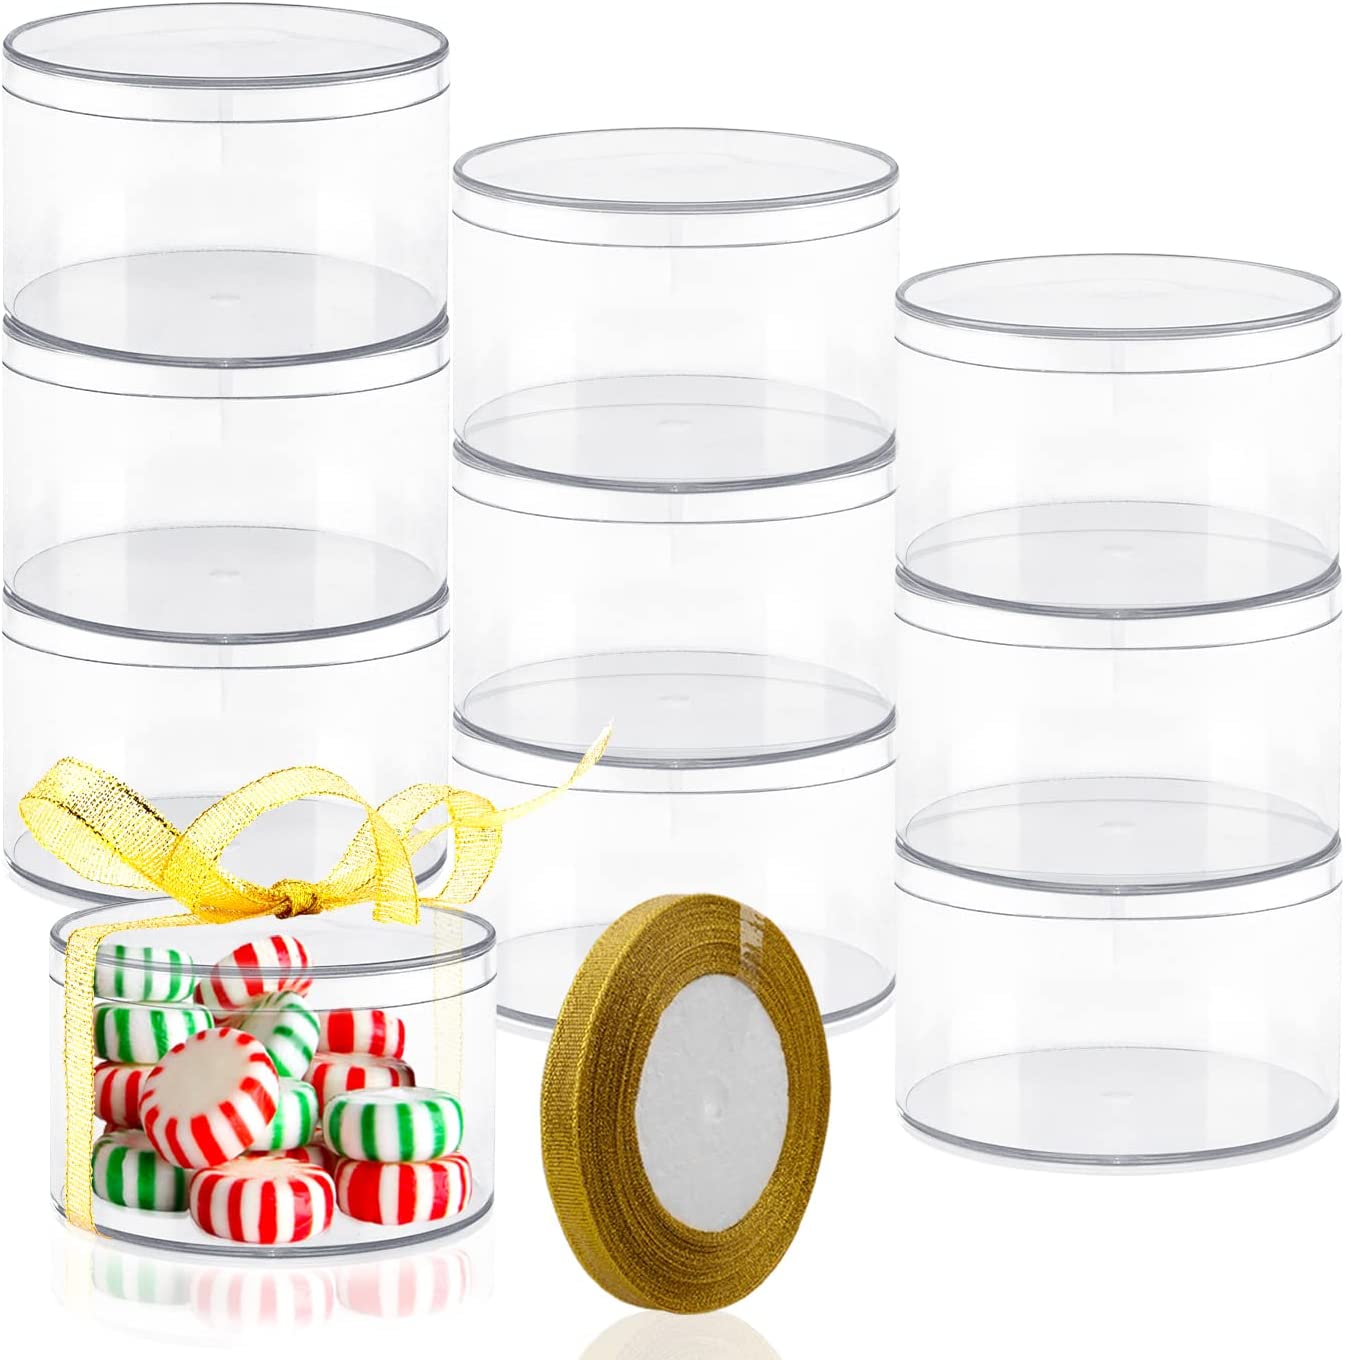 Dayaanee Round Acrylic Container with Lid Clear Round Acrylic Box